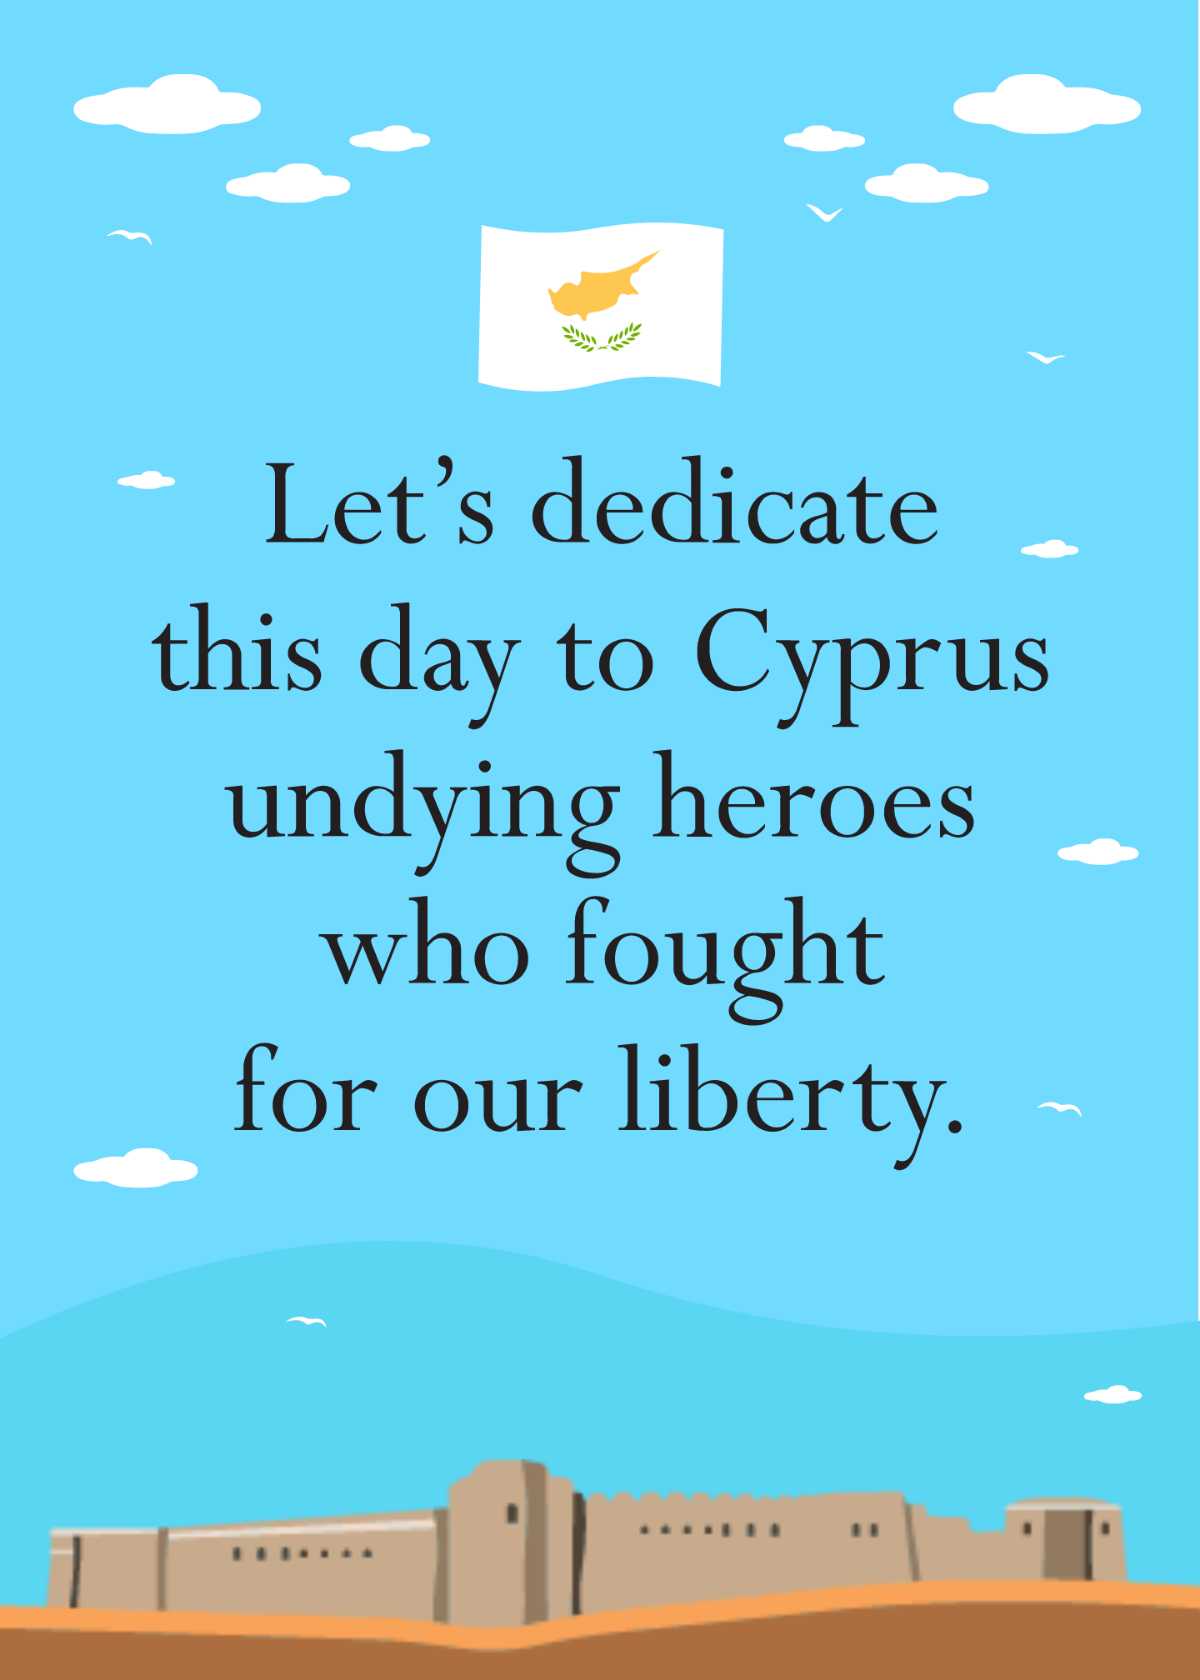 Cyprus National Day Message  Template